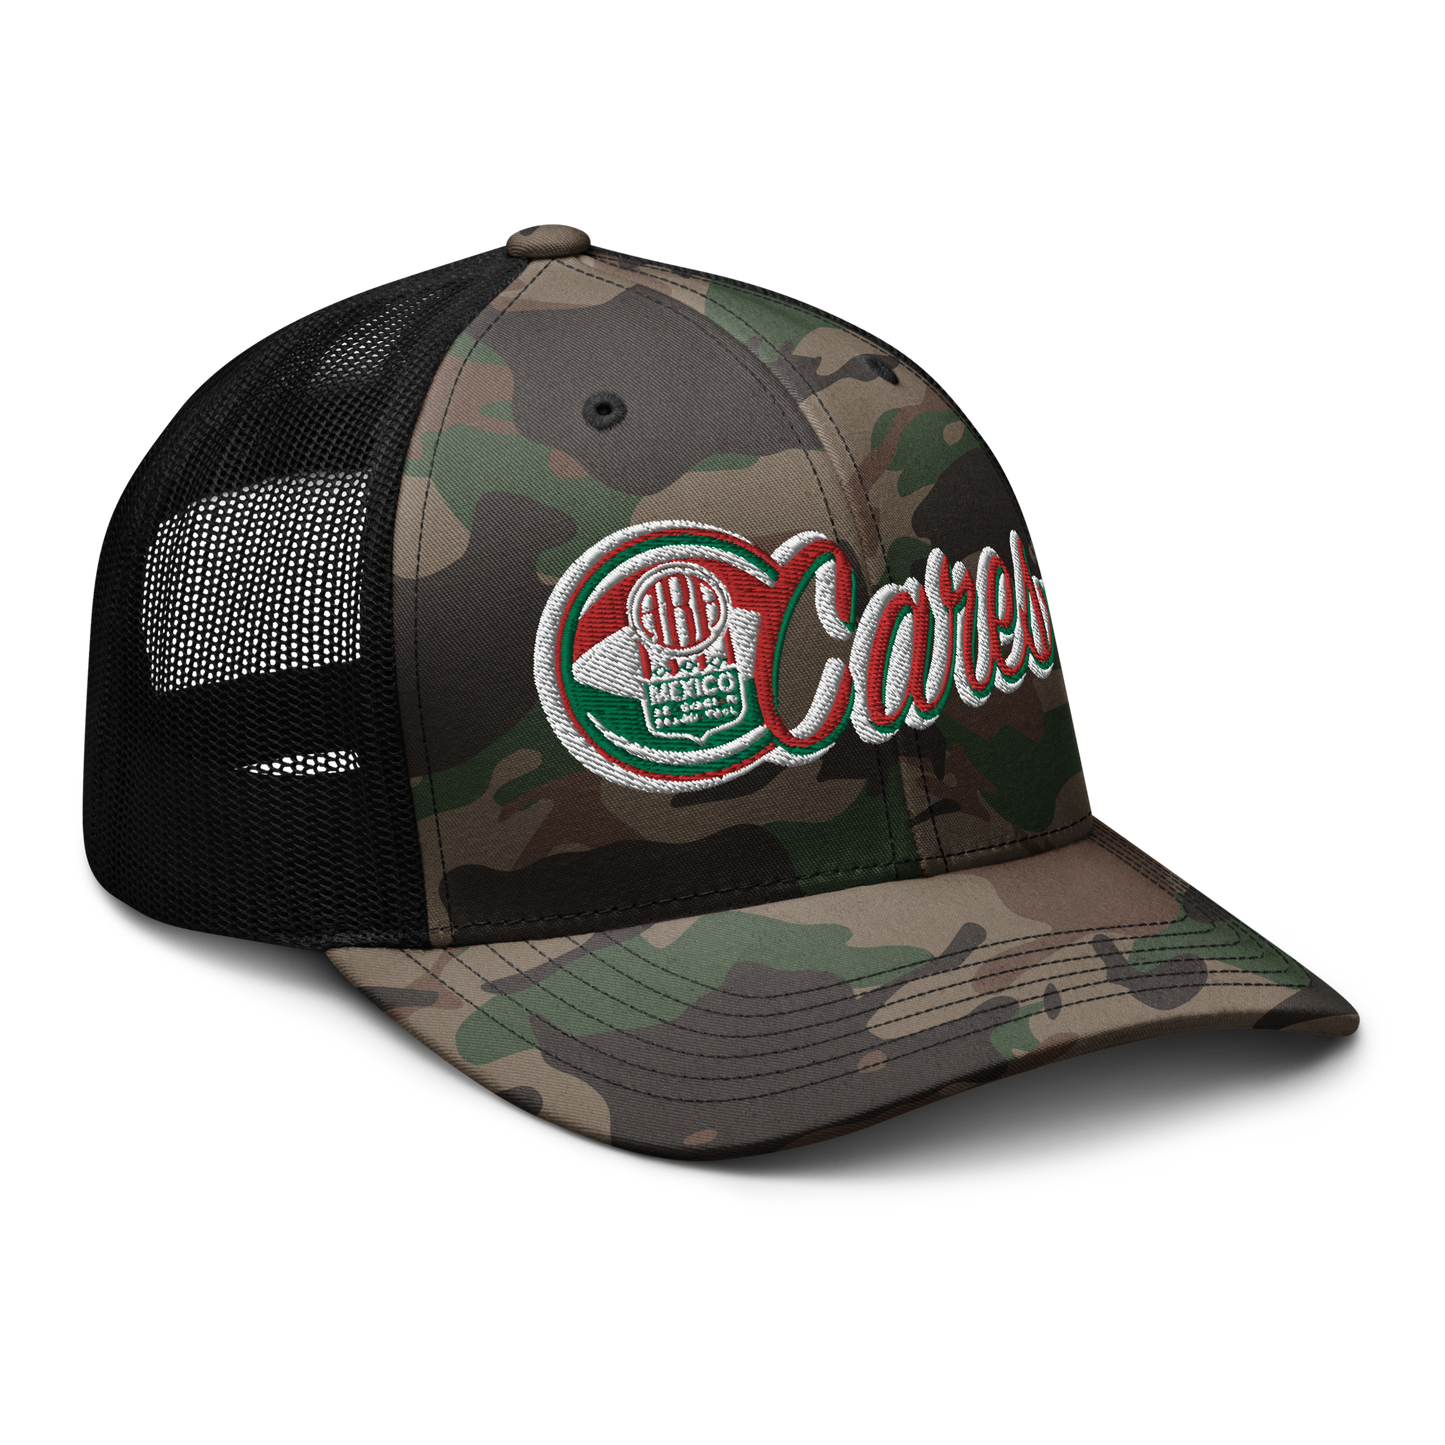 ABA MX CARES Camouflage trucker hat